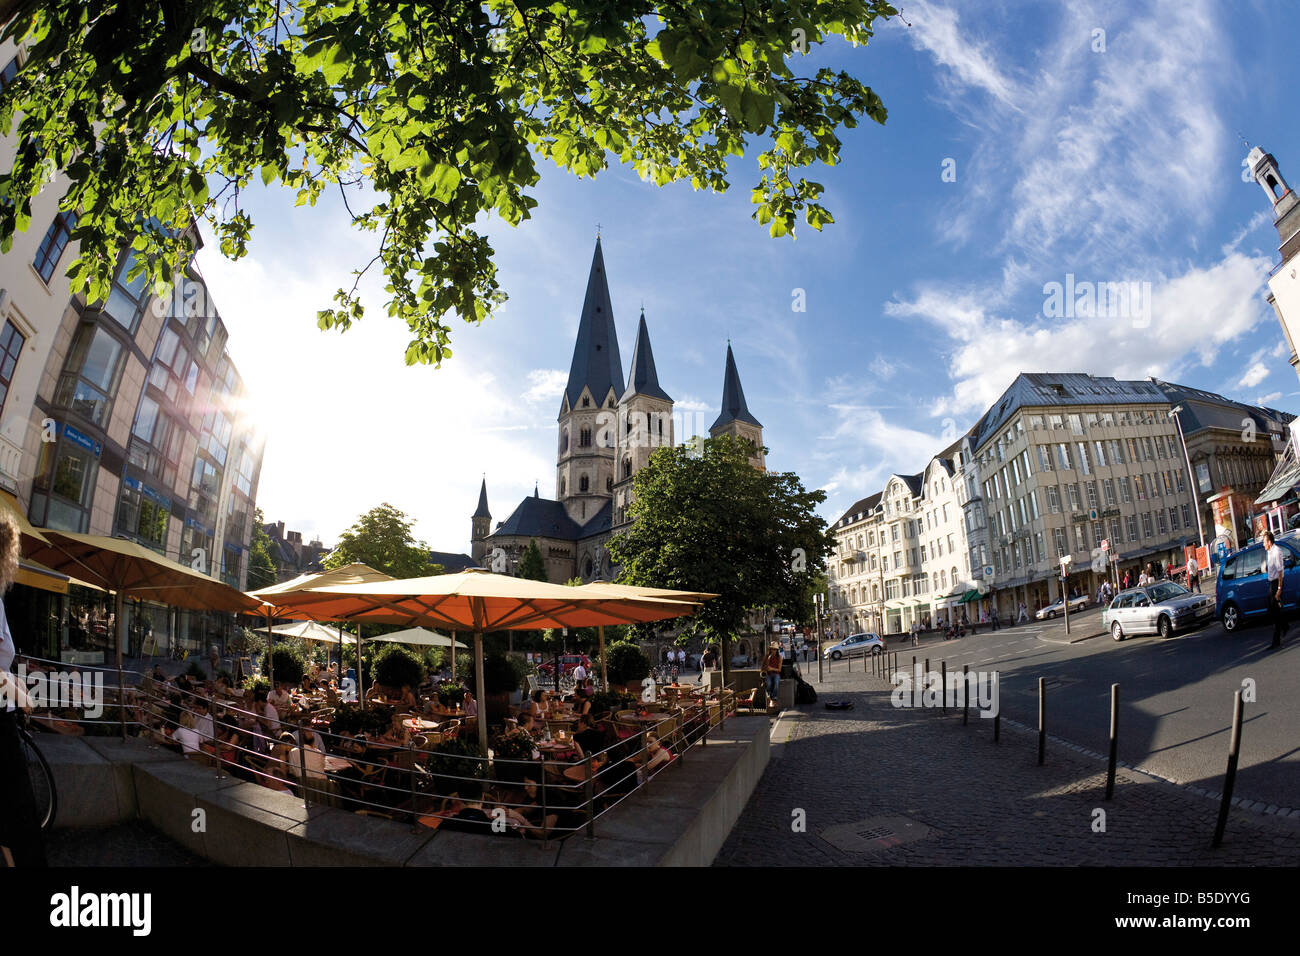 Germany, Bonn, Cathedral, sidewalkk cafe in foreground Stock Photo